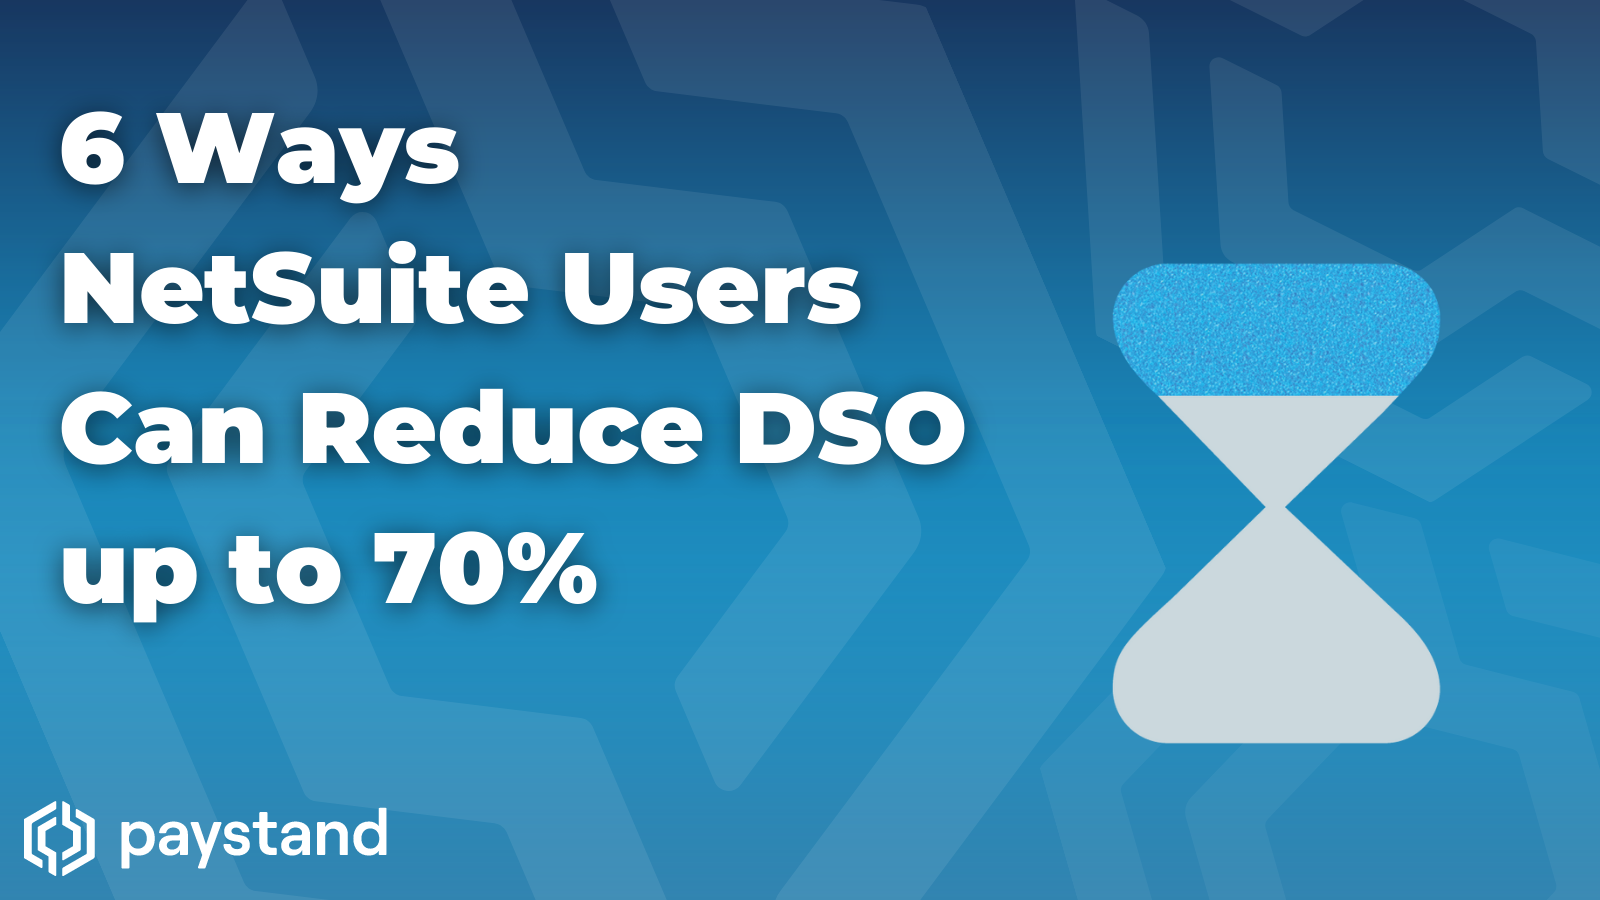 6 Ways NetSuite Users Can Reduce DSO Up to 70%